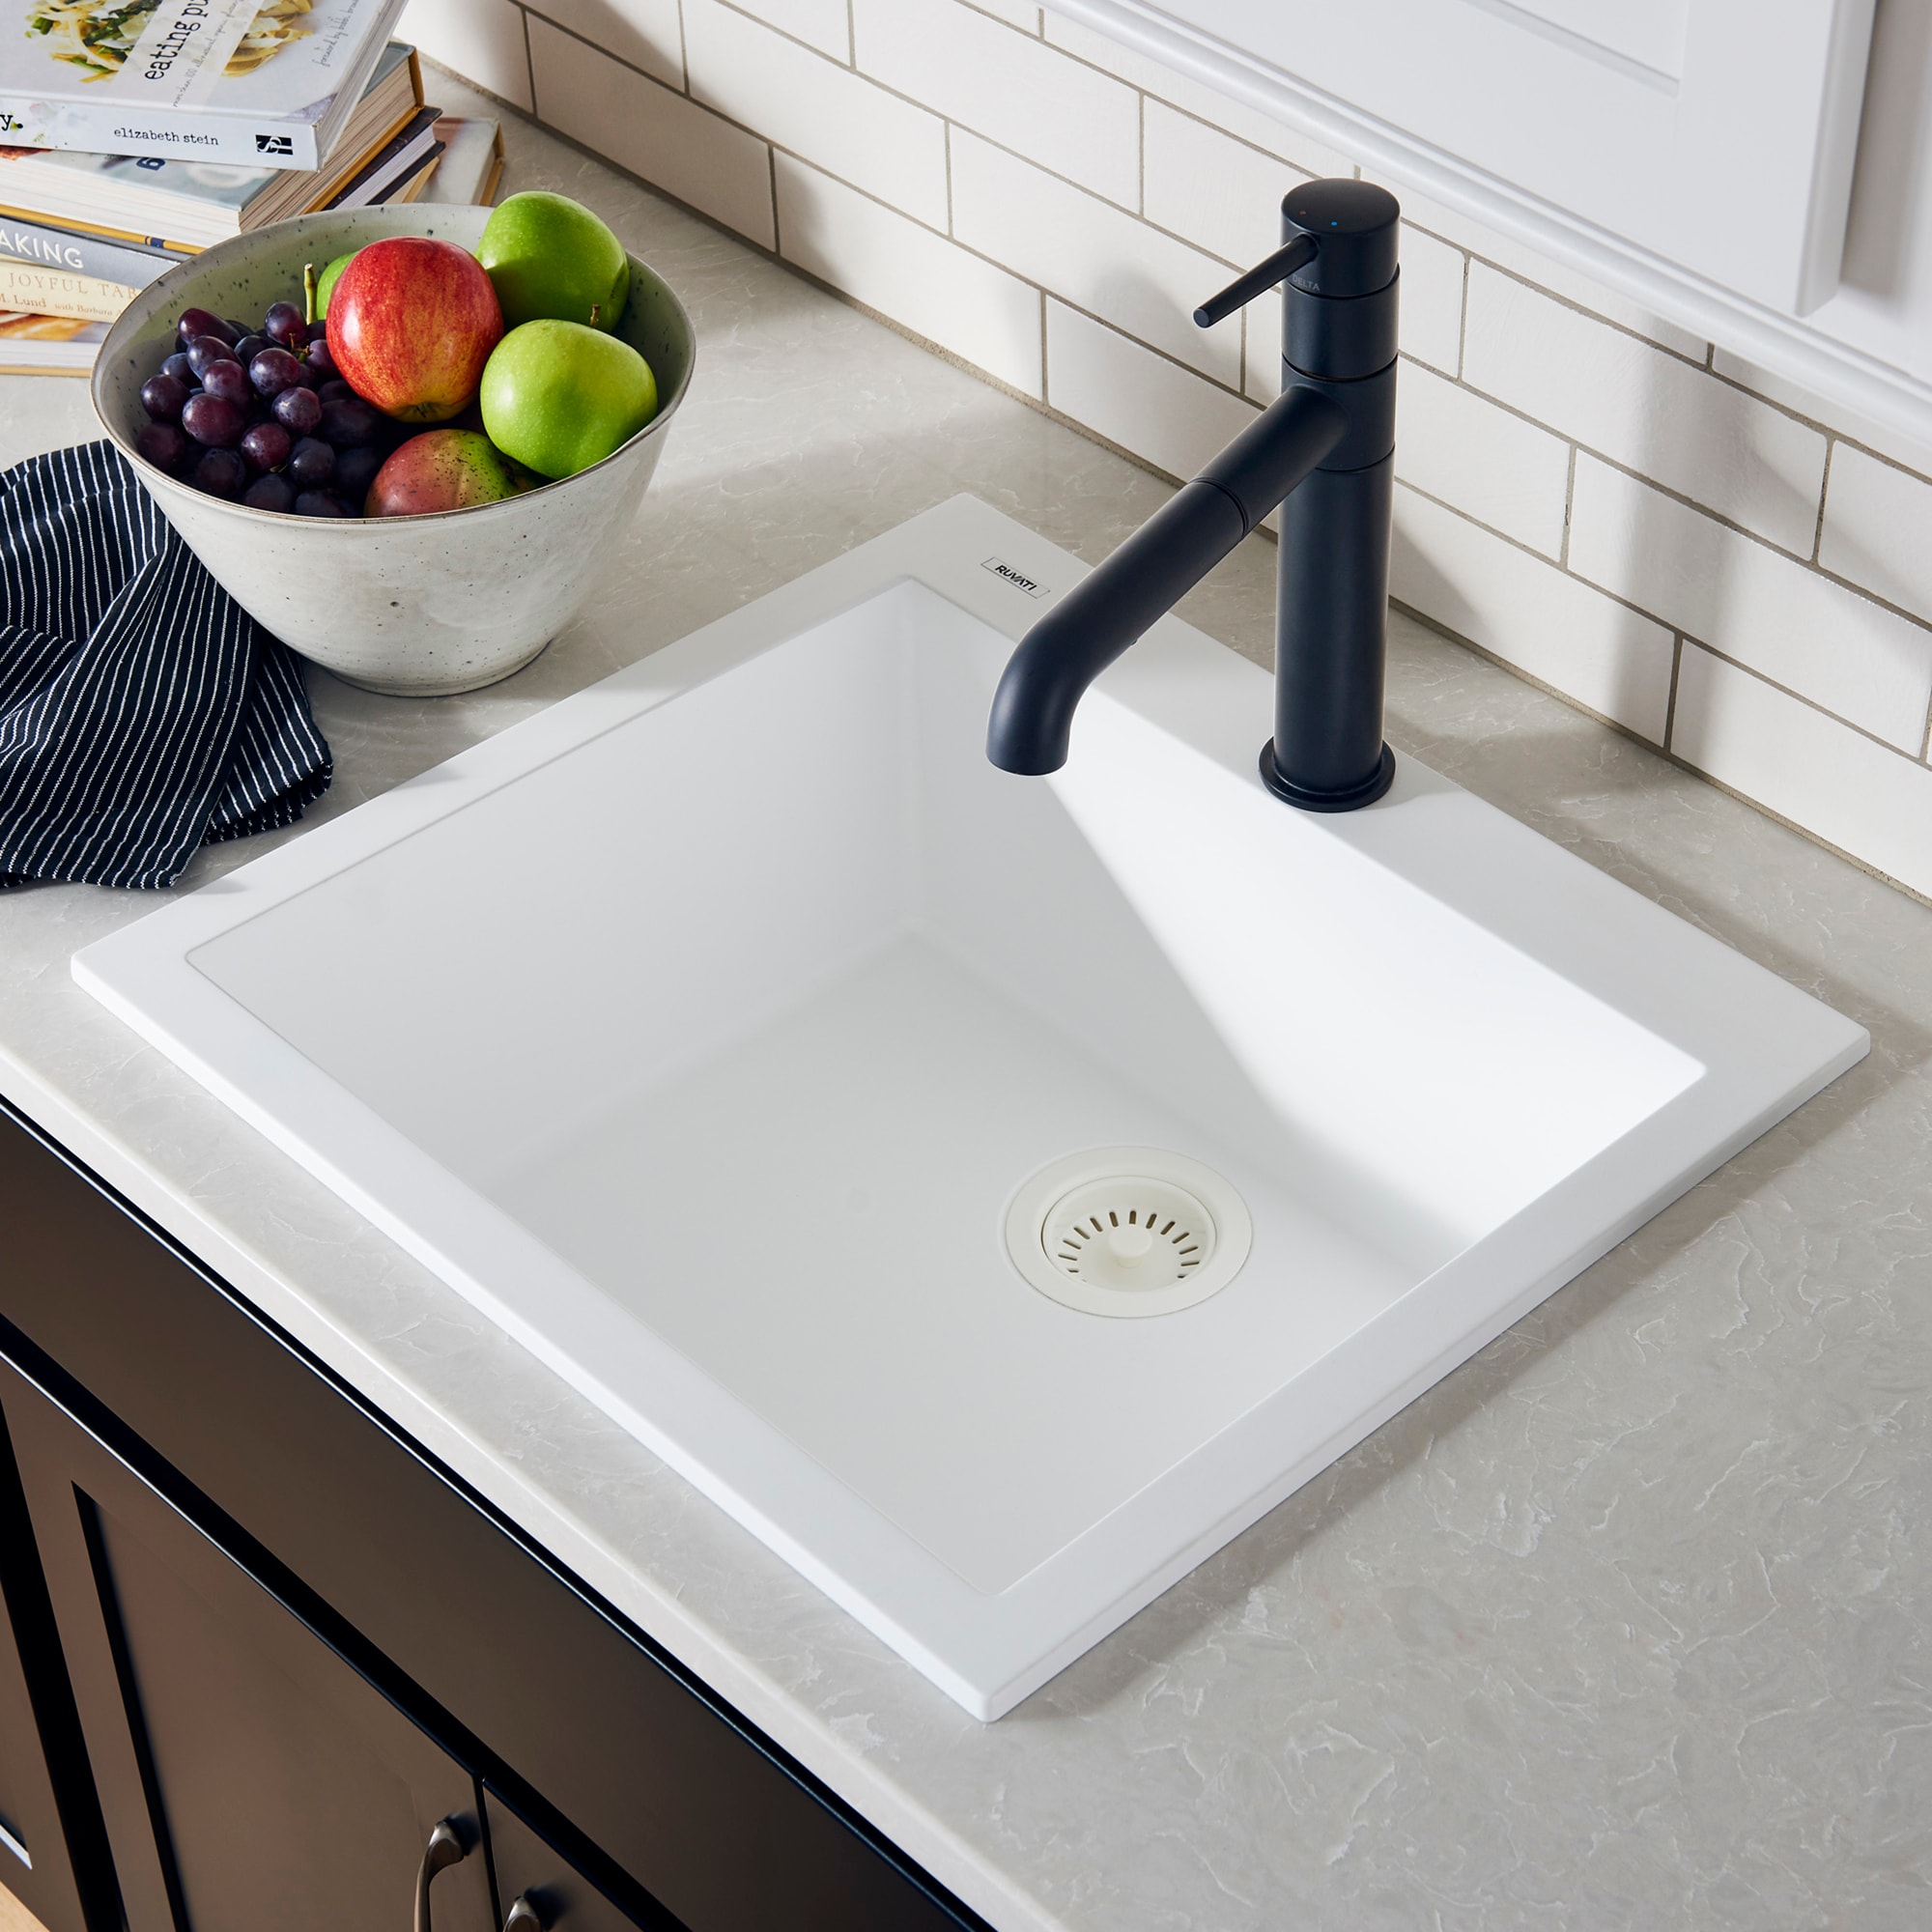 Plastic Sink Insert Collapsible Large Size White 16 x 22.5